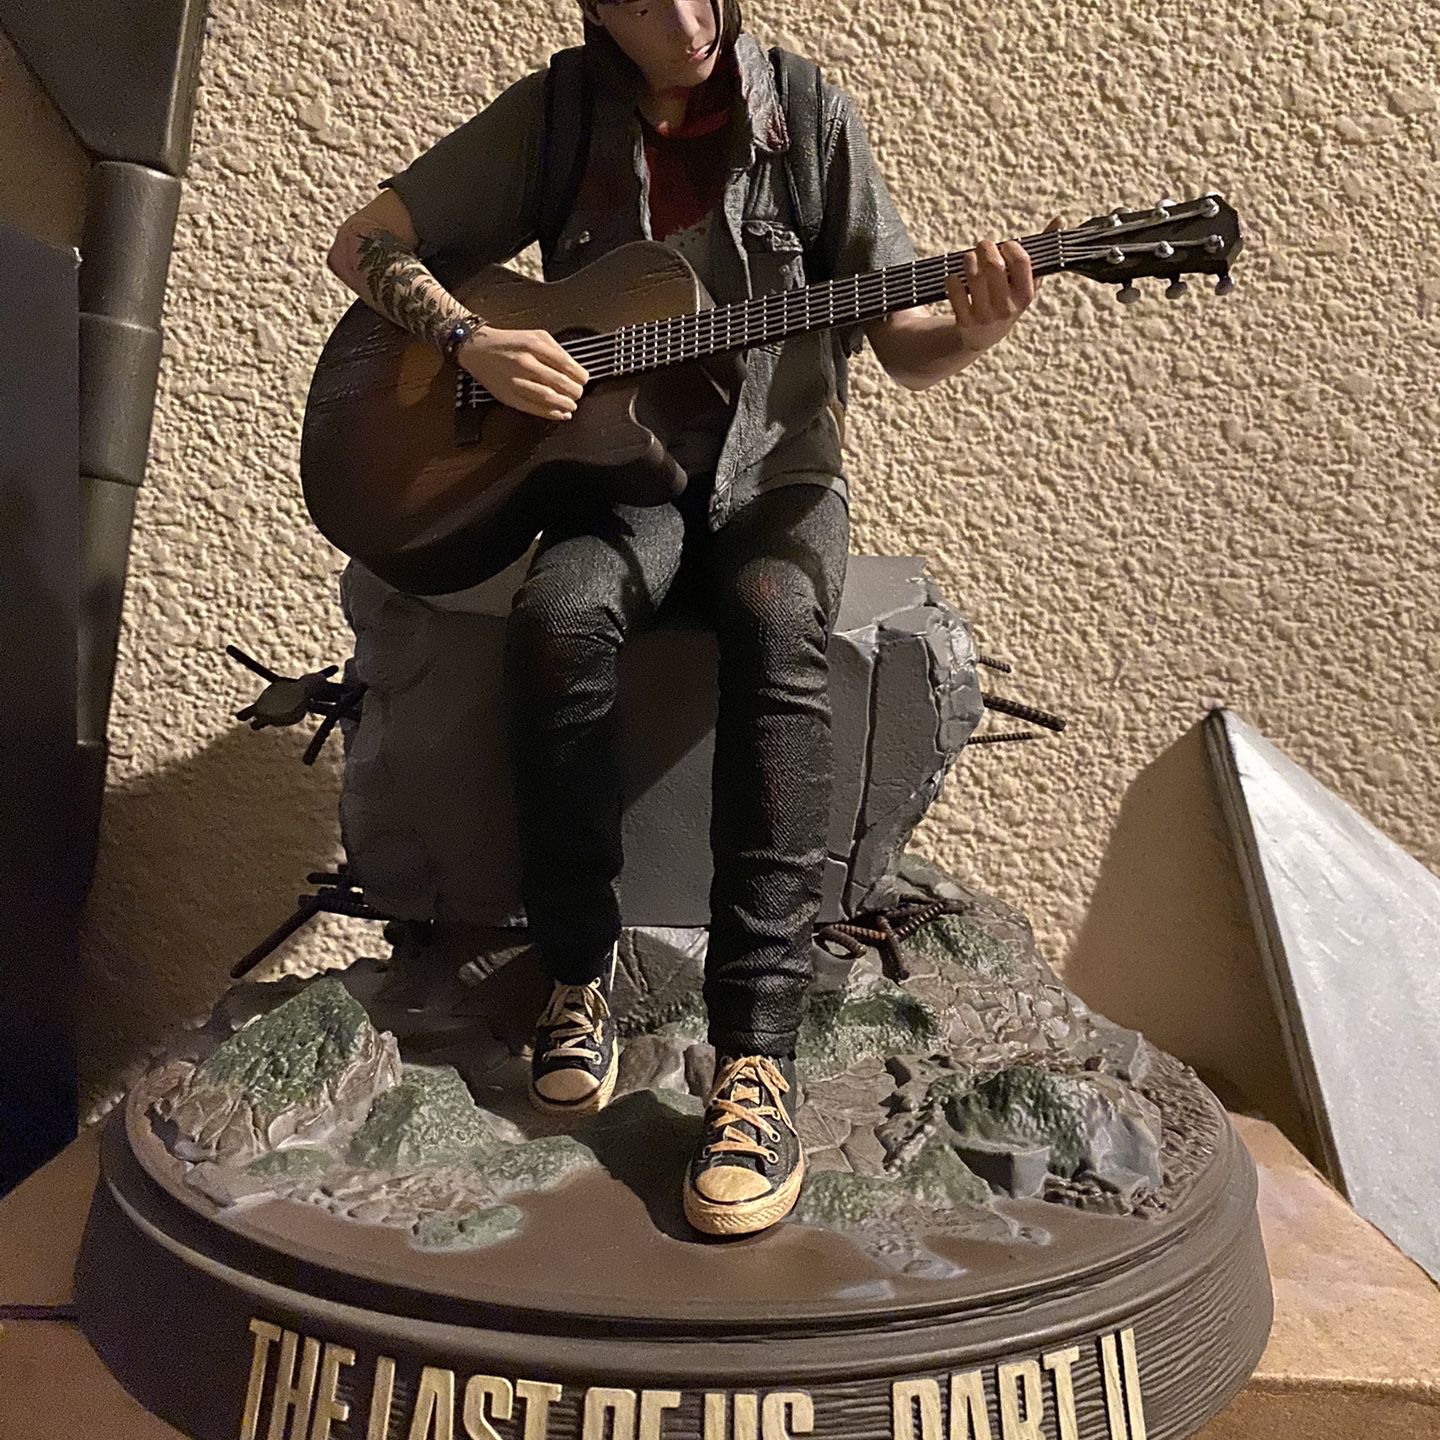 Last Of Us 2 Ellie Special Edition Statue